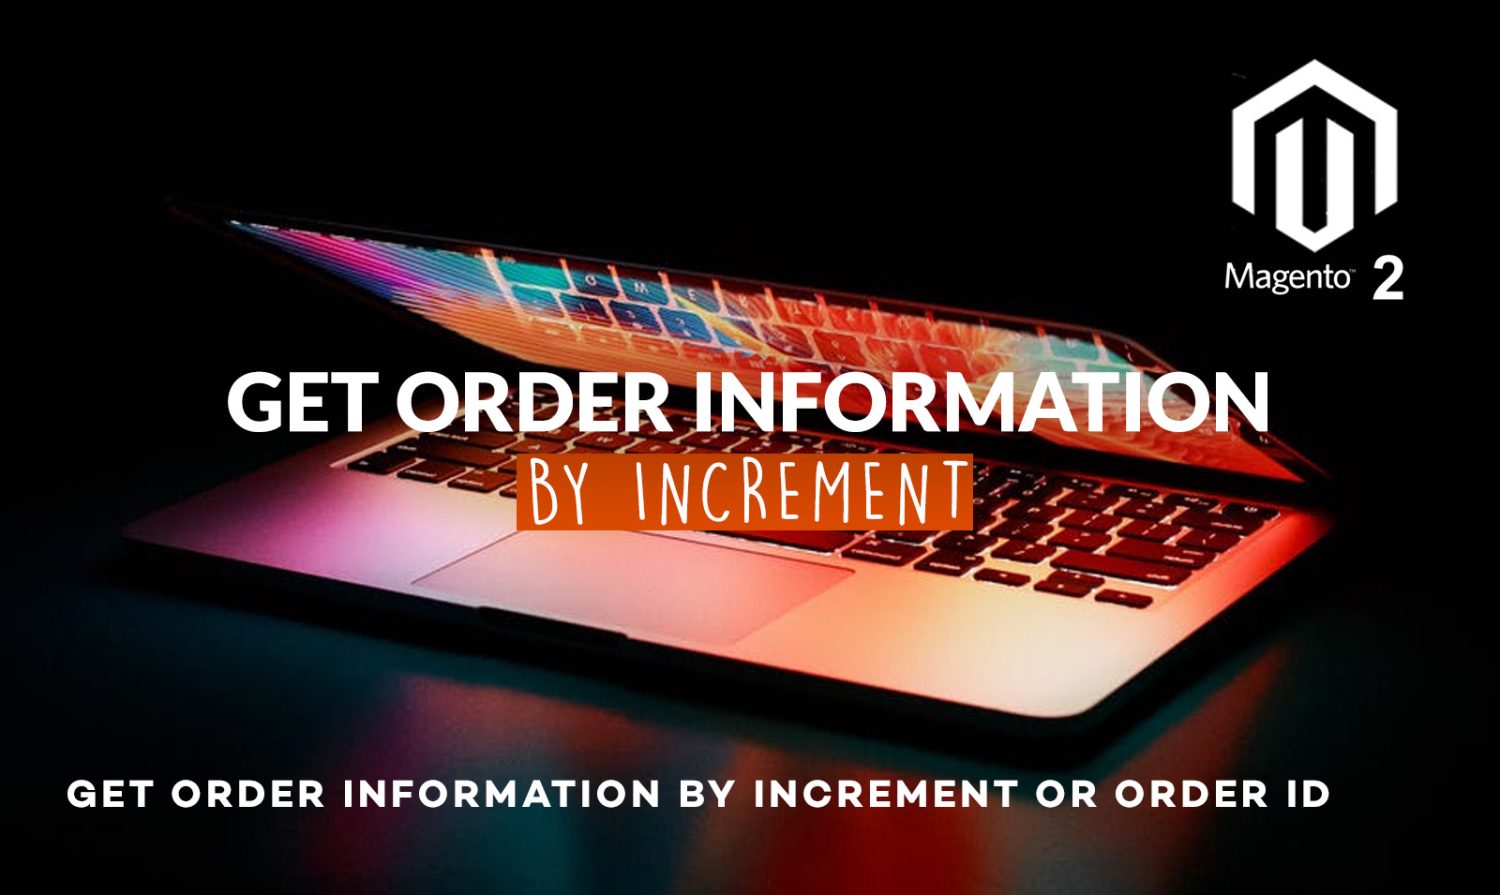 Magento 2 : Get order information by increment or order id